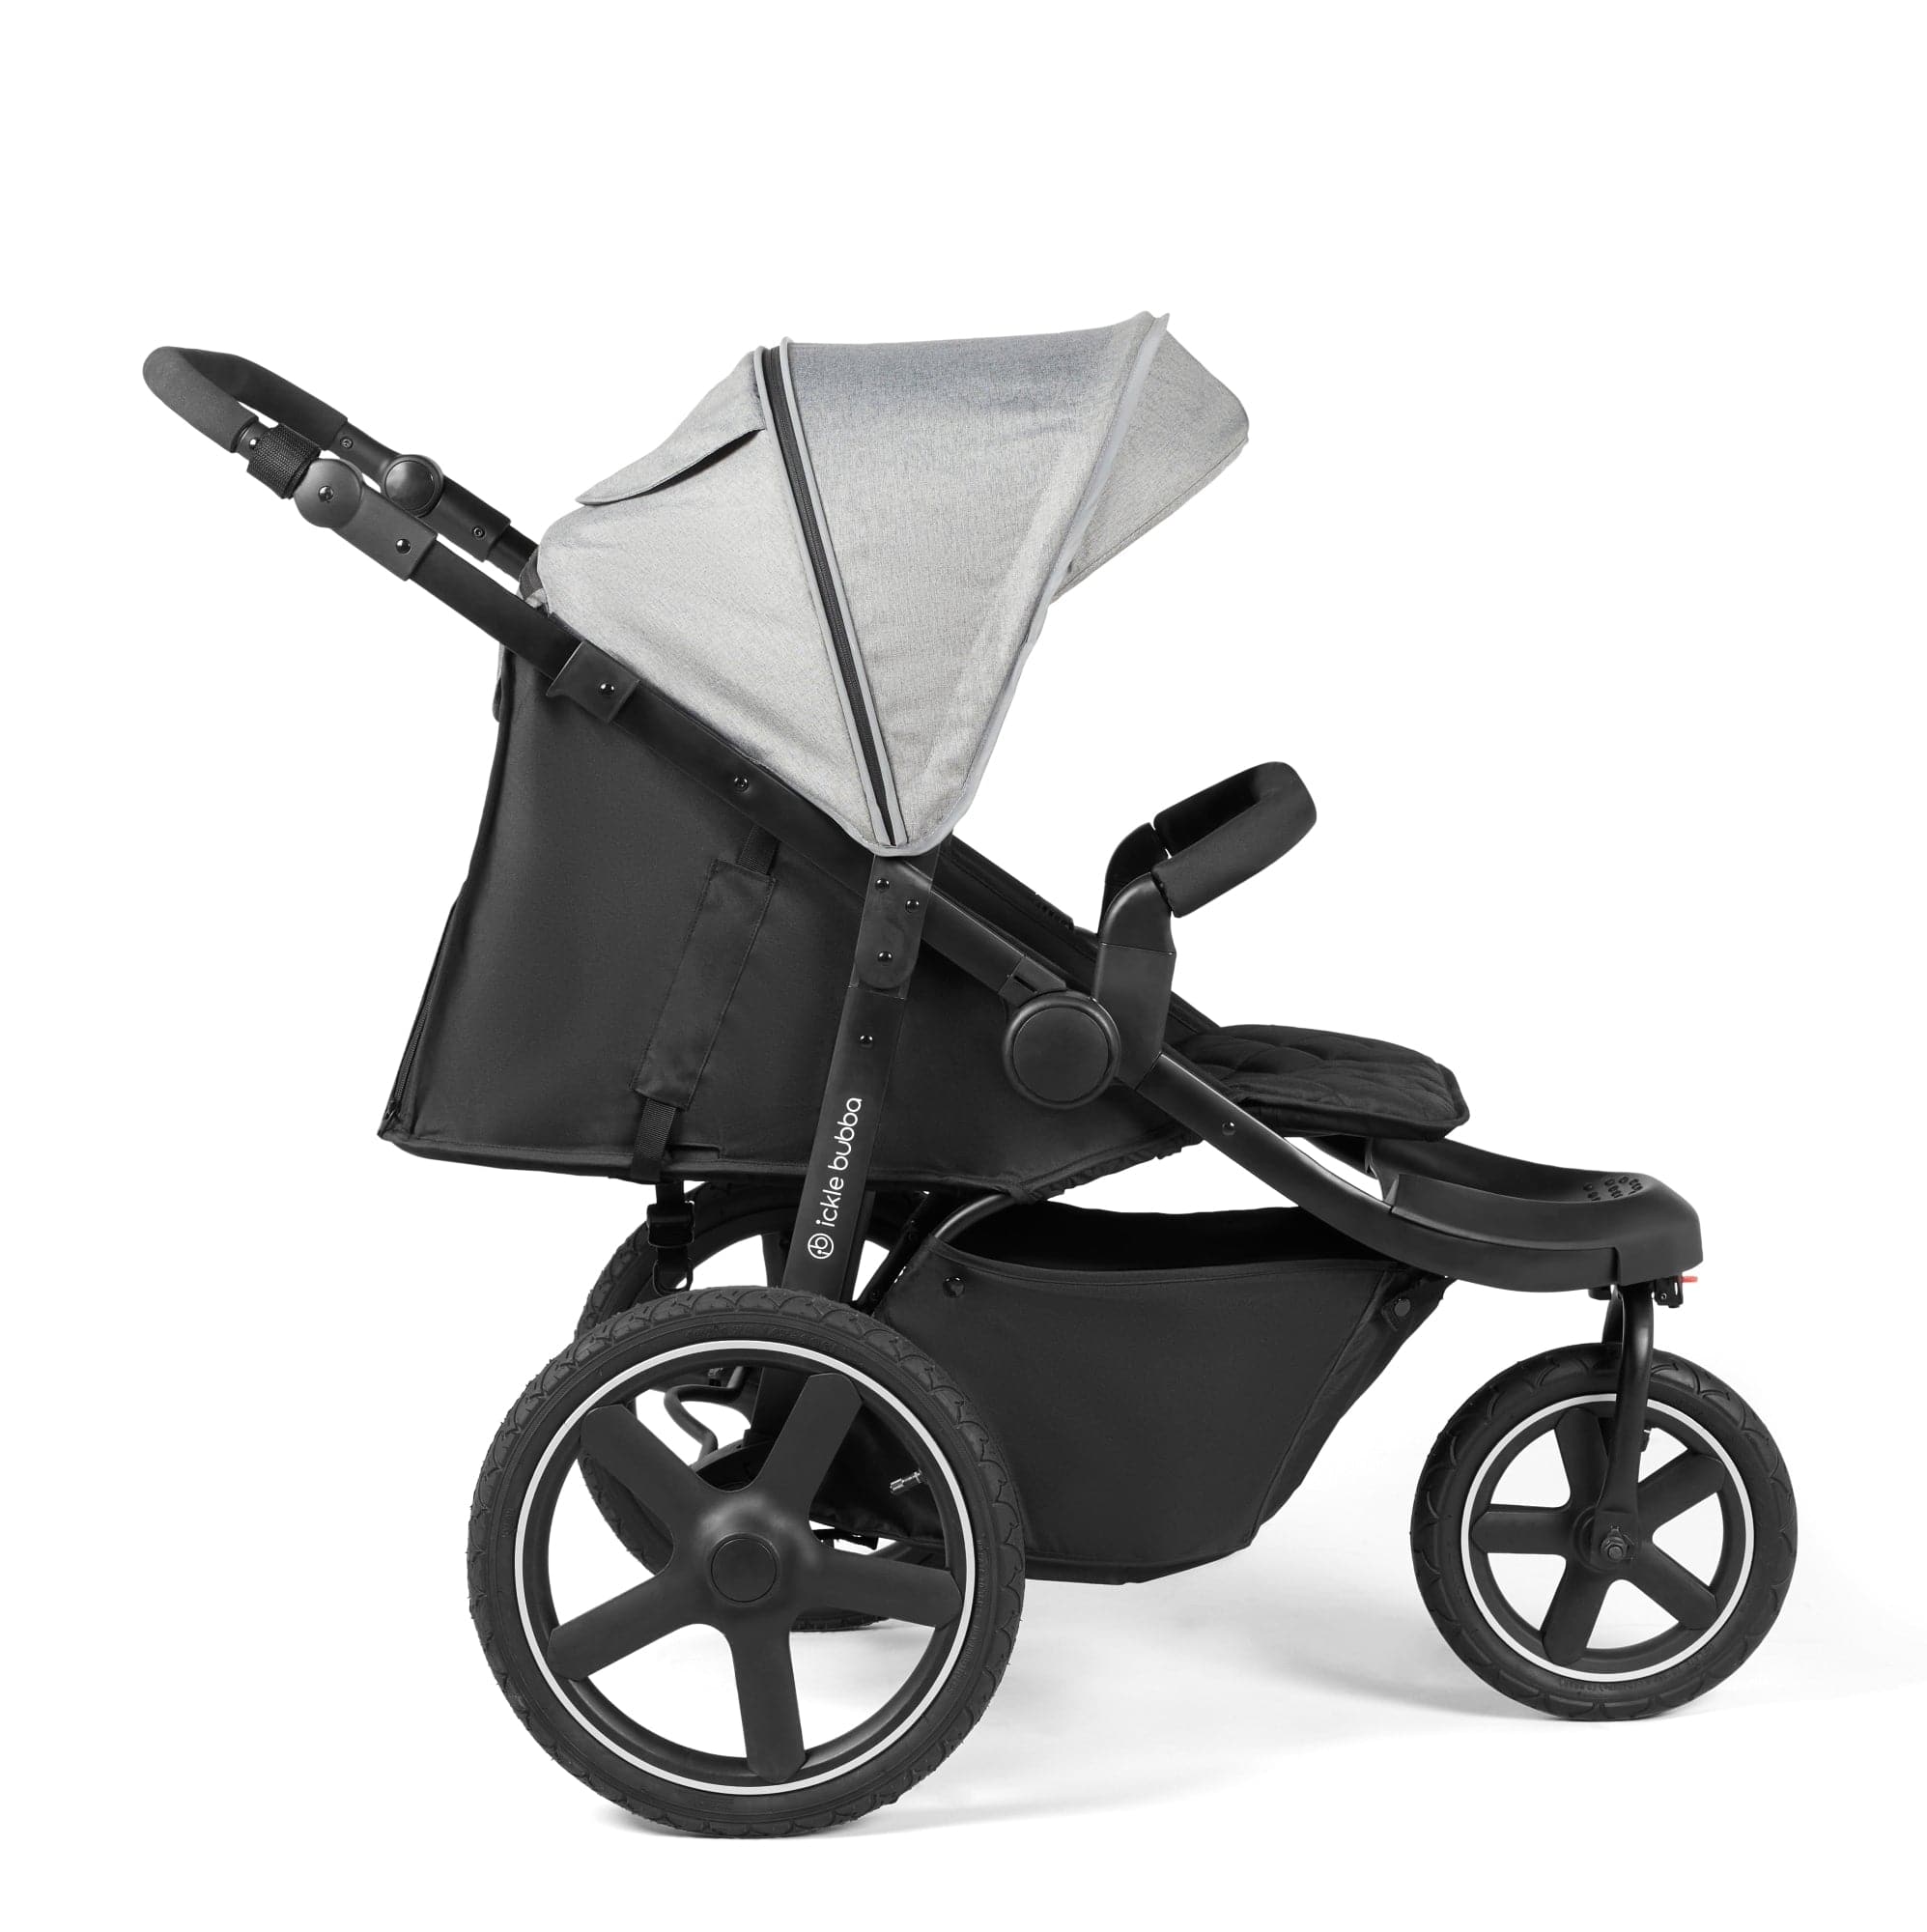 Ickle Bubba Venus Venus Max Jogger 3 Wheel Stroller I-Size Travel System with Isofix Base - Space Grey - For Your Little One